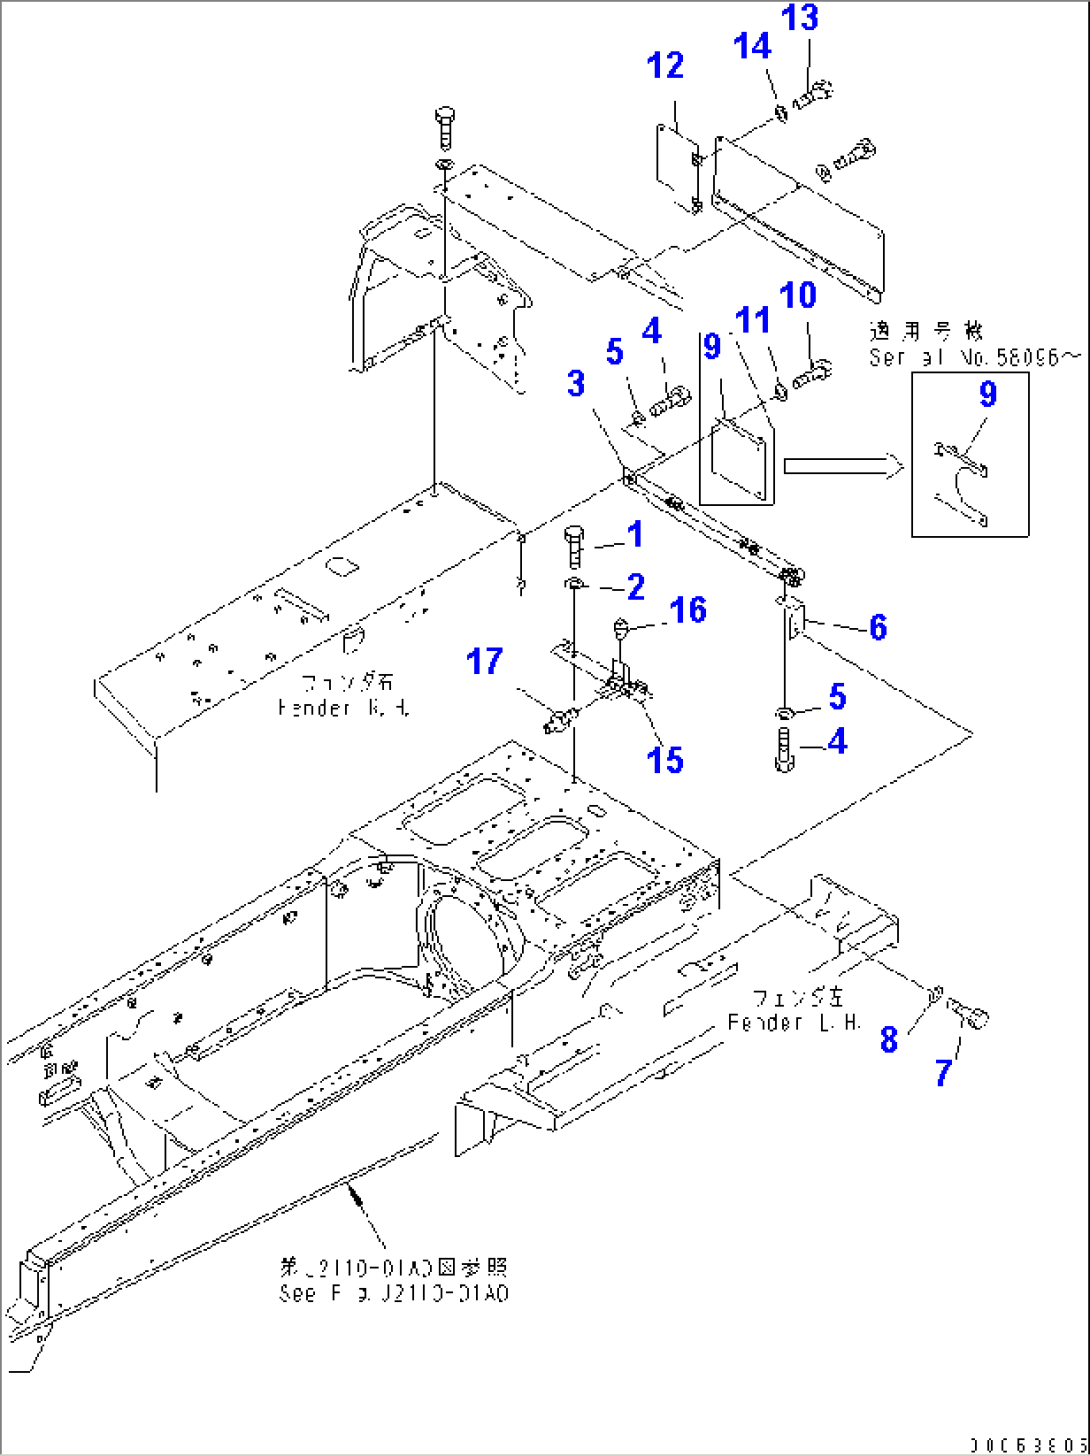 SUPPORT AND REAR COVER (FOR REAR P.C.U.)